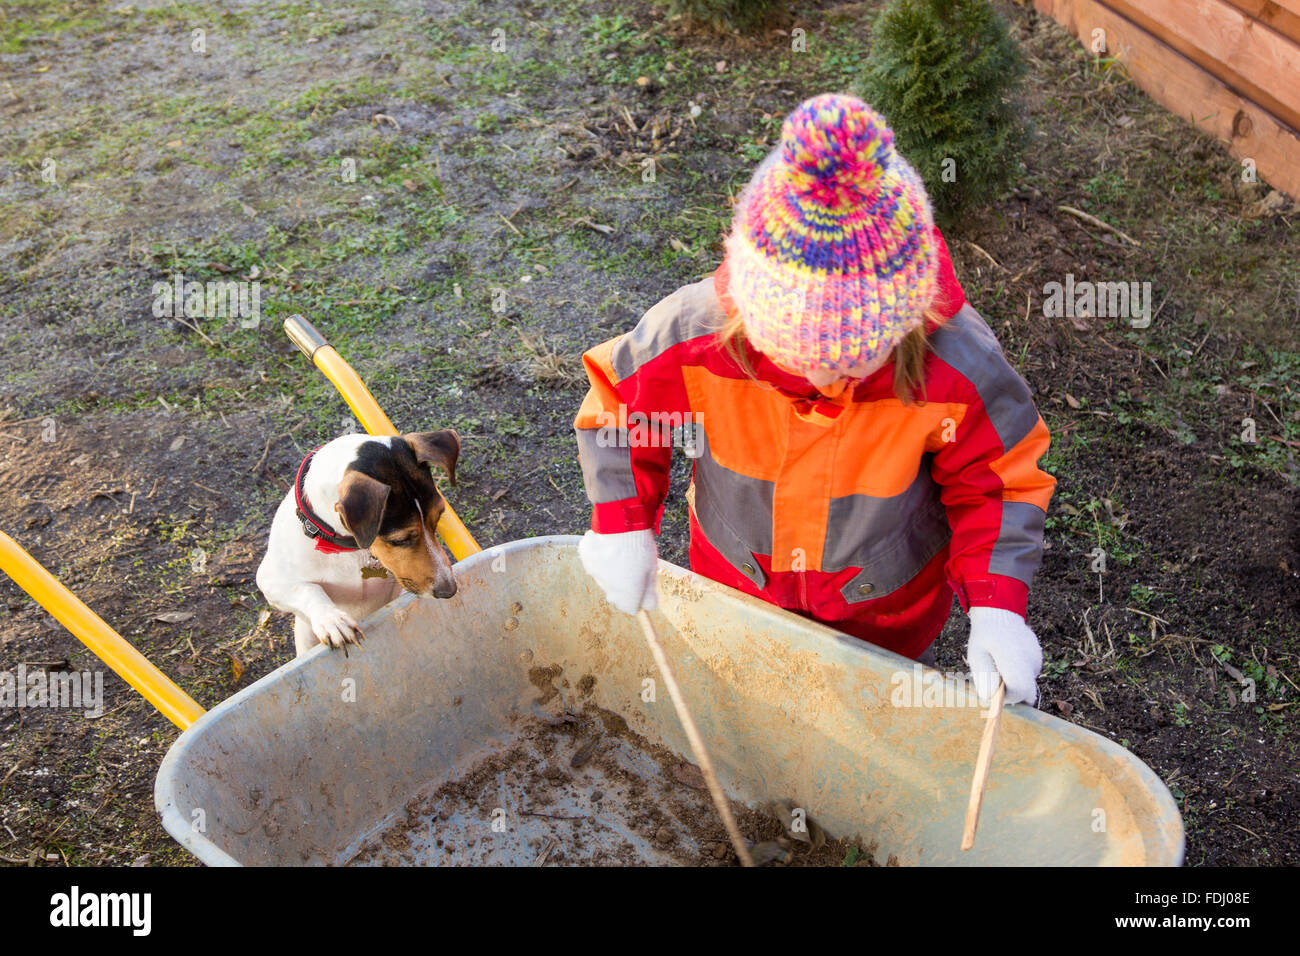 little girl with a dog looking at something in a wheelbarrow Stock Photo